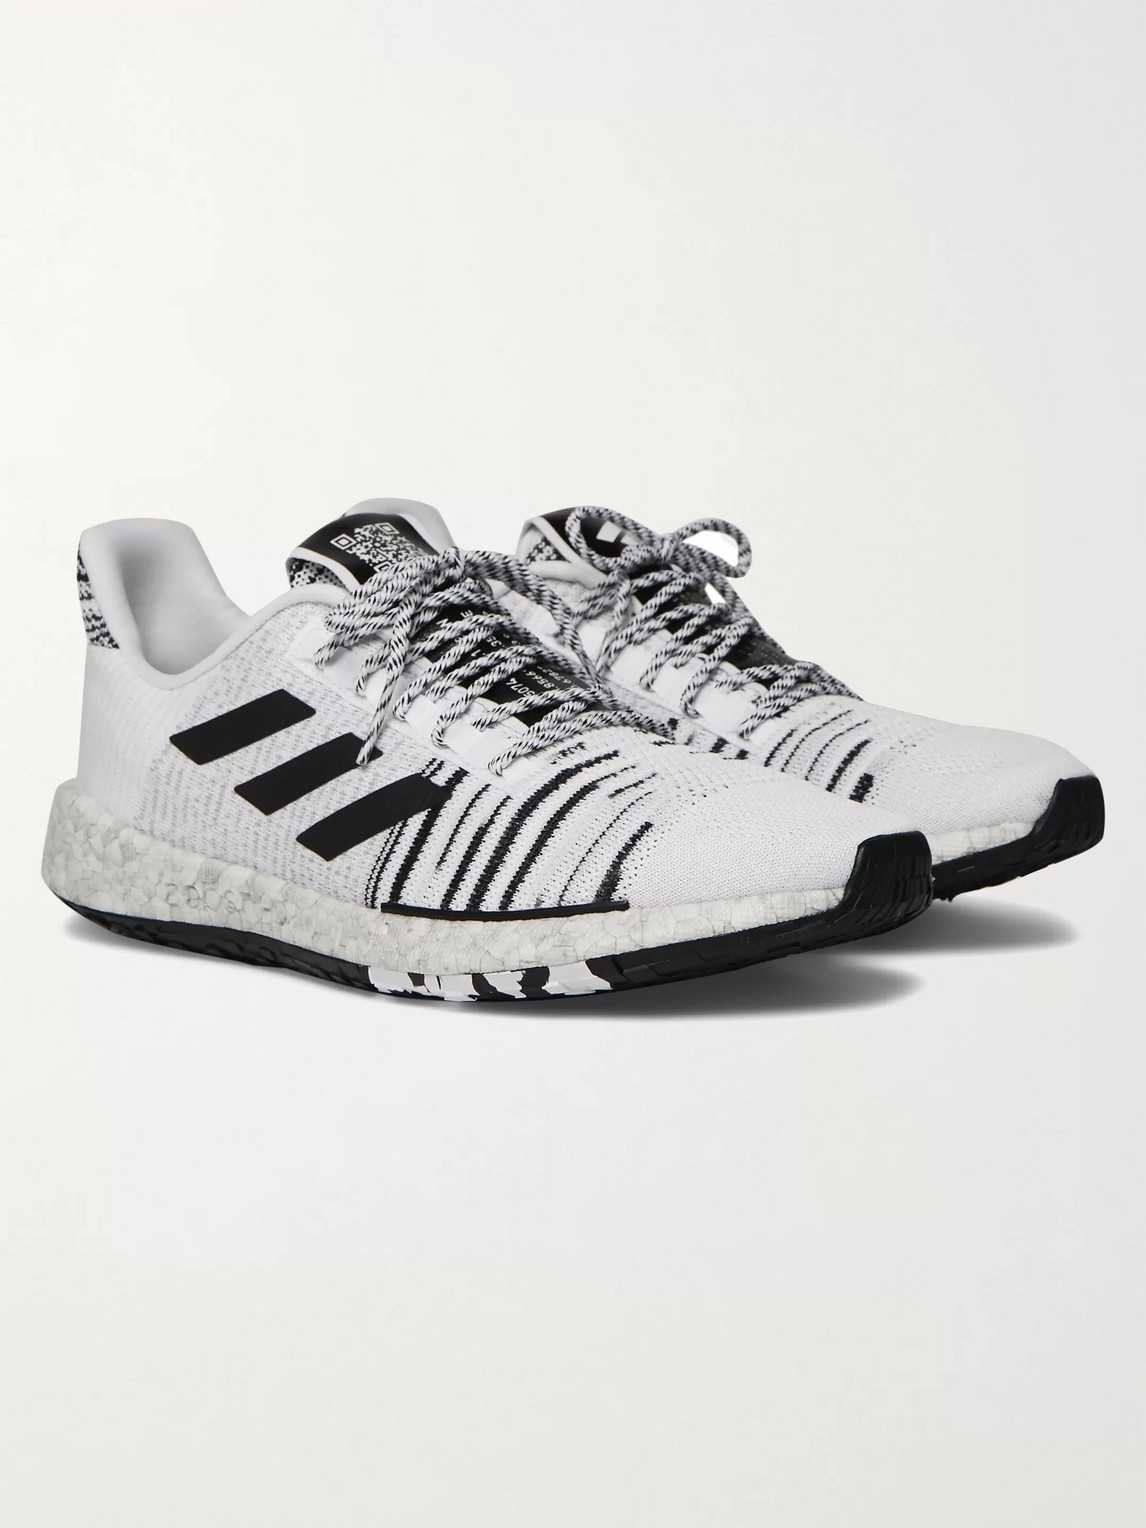 Adidas Consortium Missoni Pulseboost Hd Stretch-knit Sneakers In White